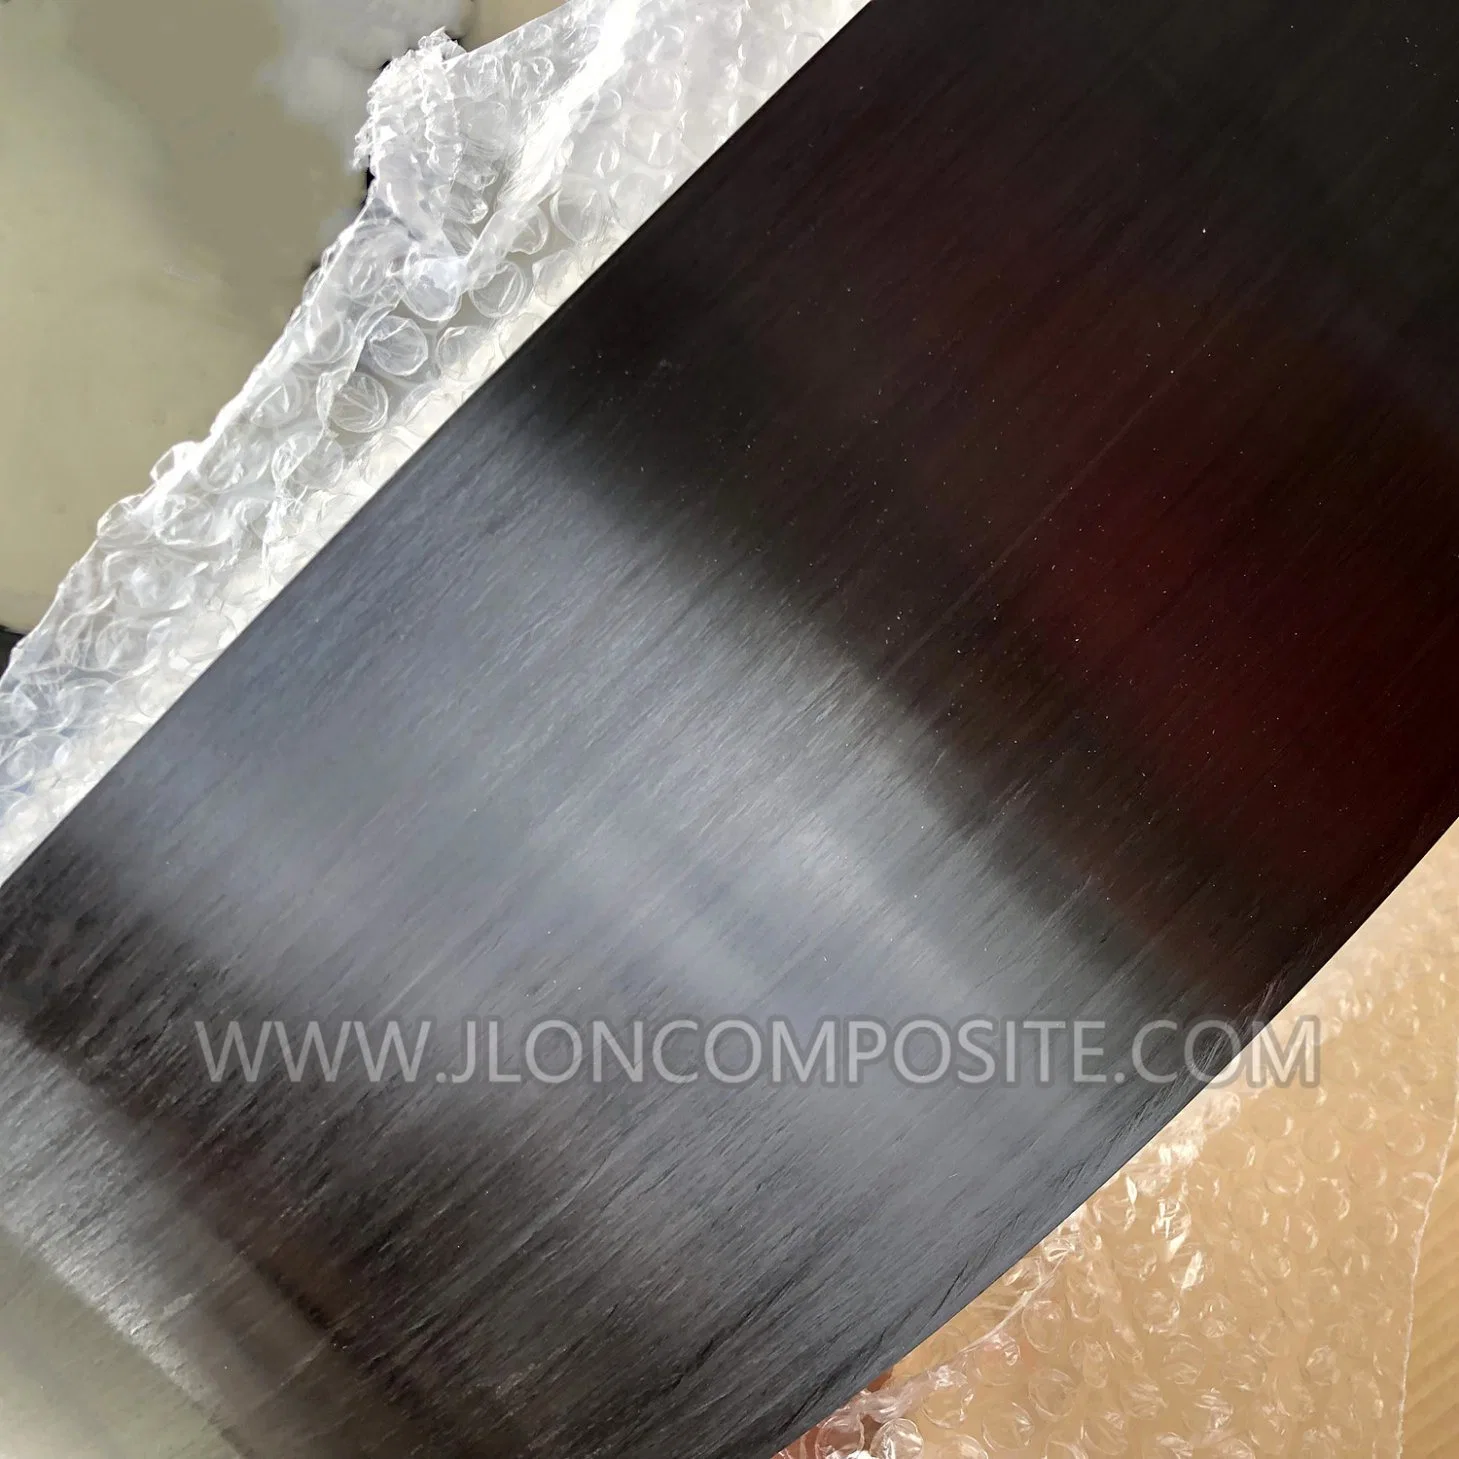 2.0mm Thick Carbon Fiber Laminate for Structural Strengthening